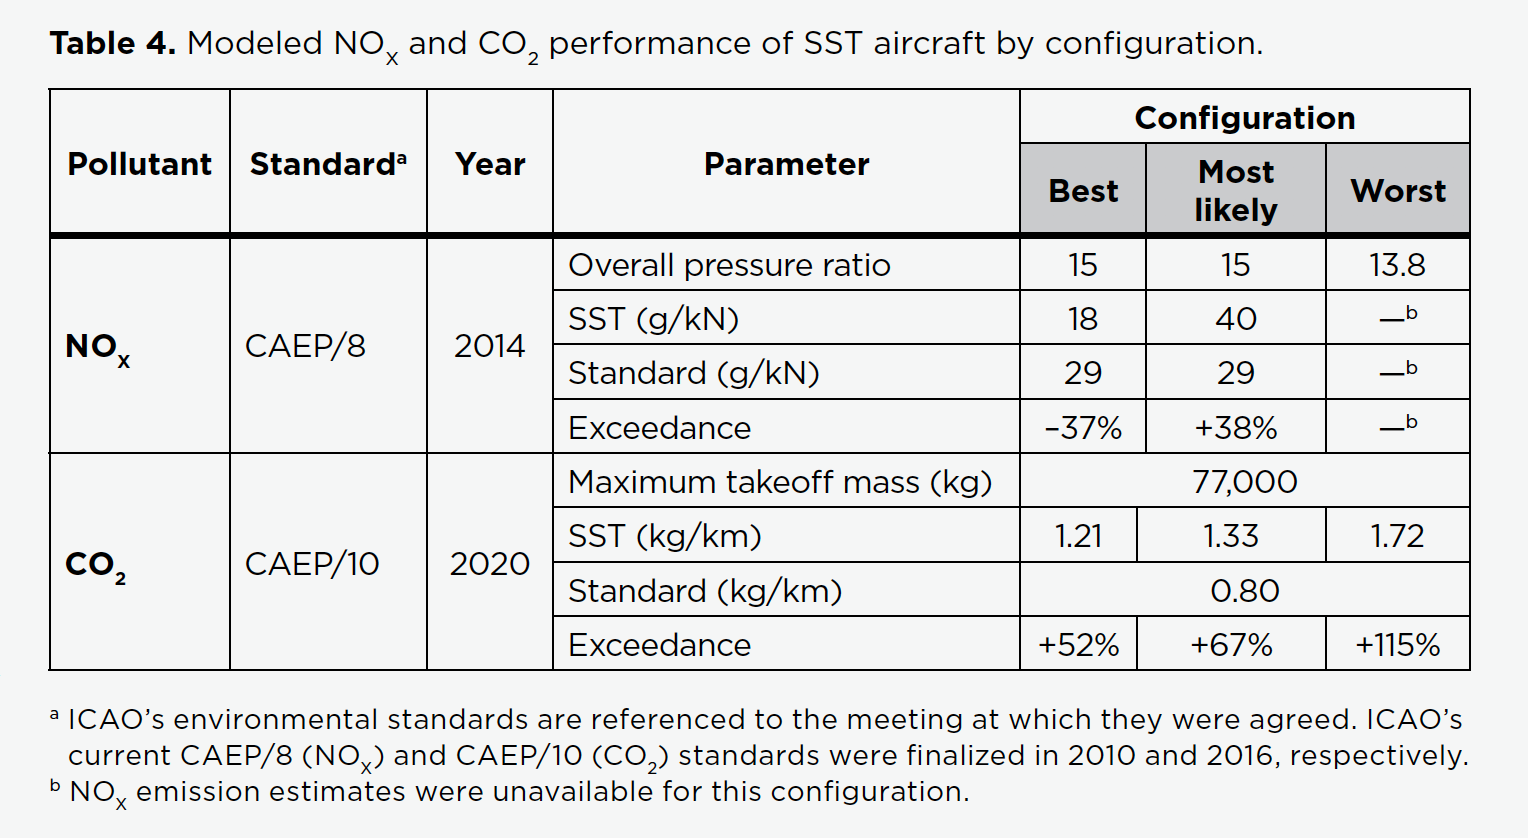 Modeled Nox and CO2 performance of SST aircraft by configuration